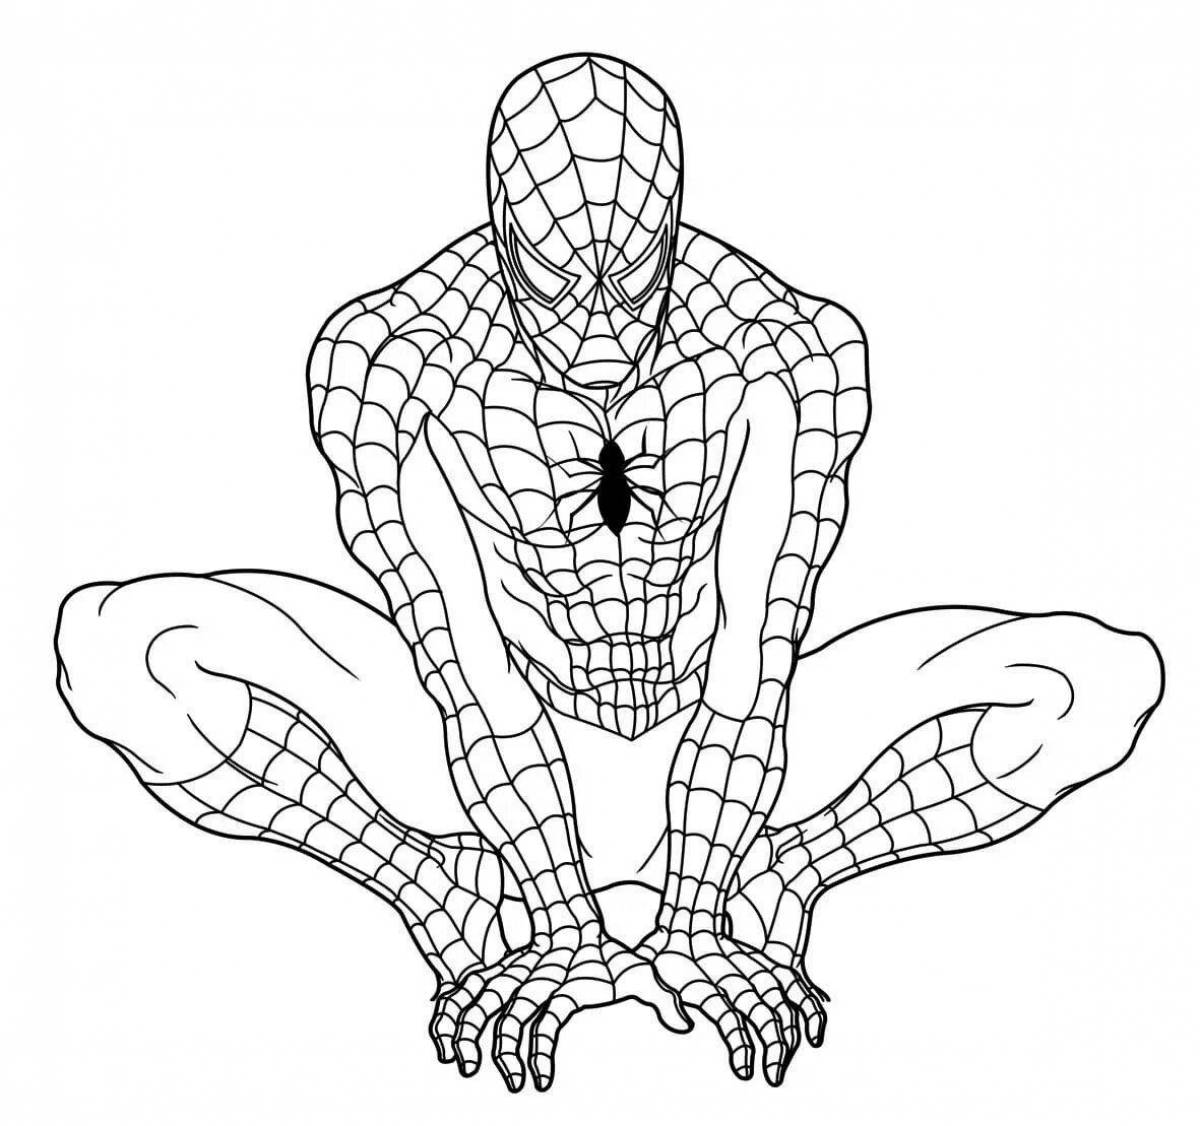 Spiderman's bold coloring game